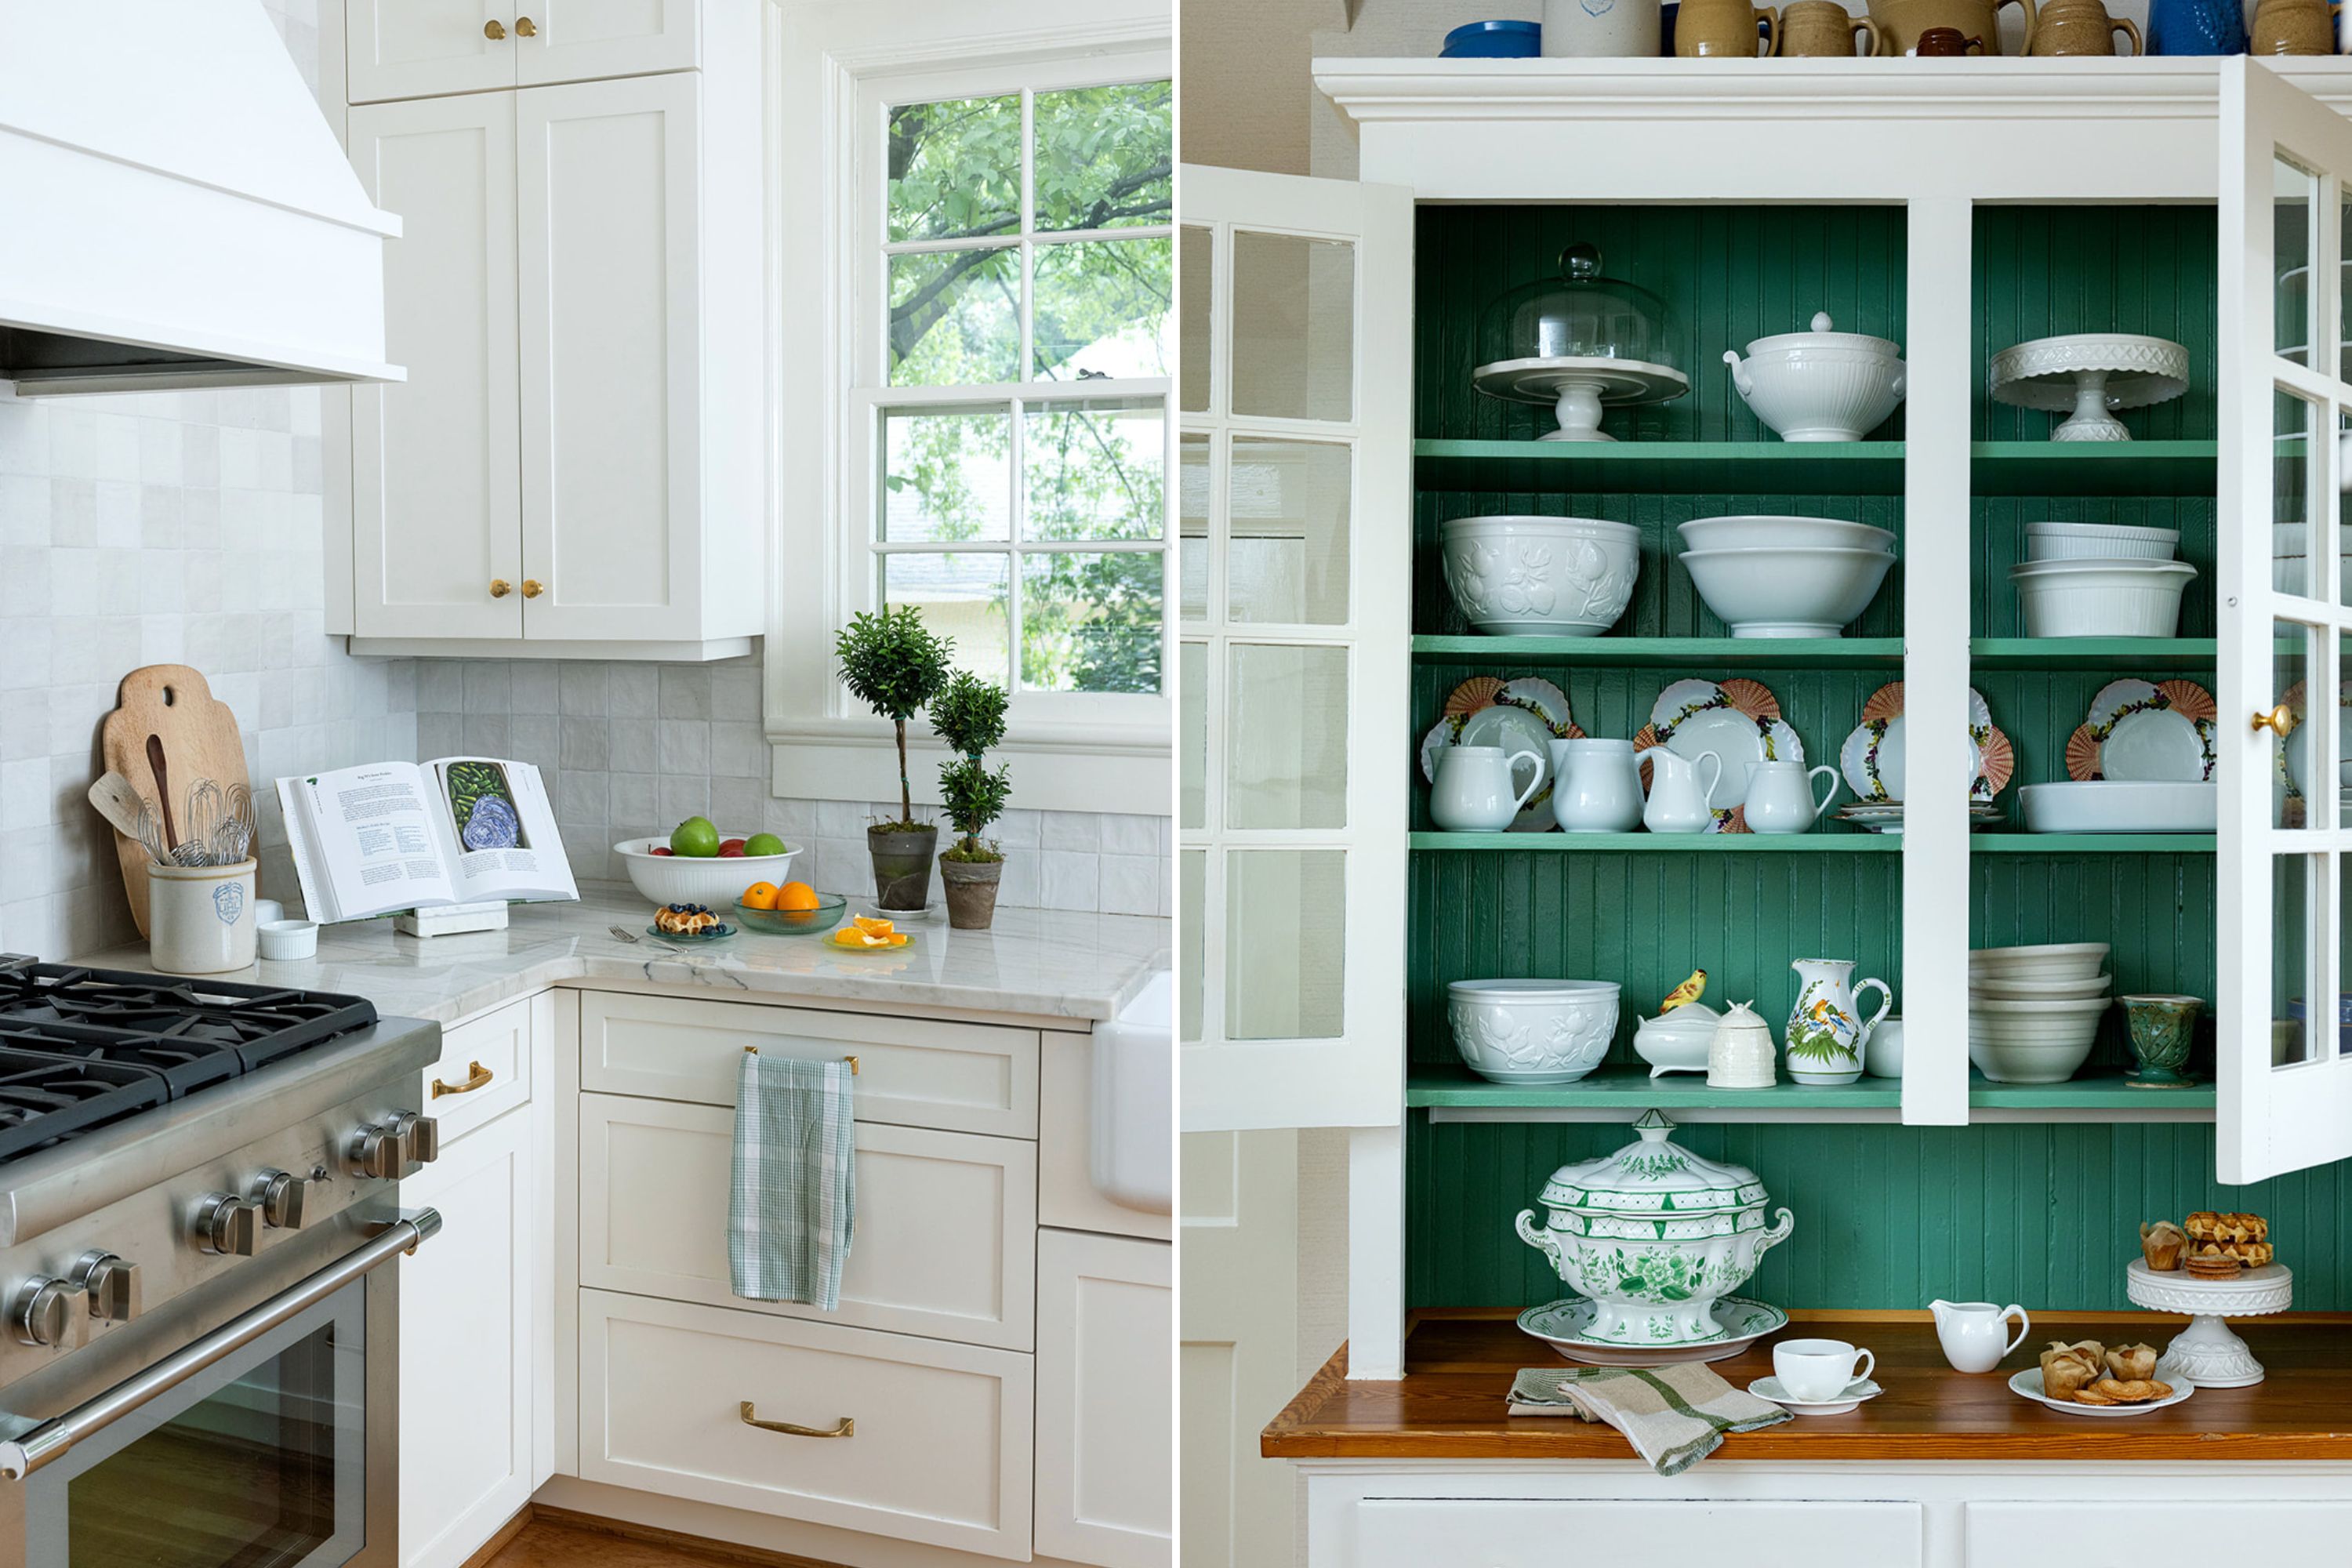 A kitchen with marble and white wood finishes; a cabinet with dishes and a dark green inside.